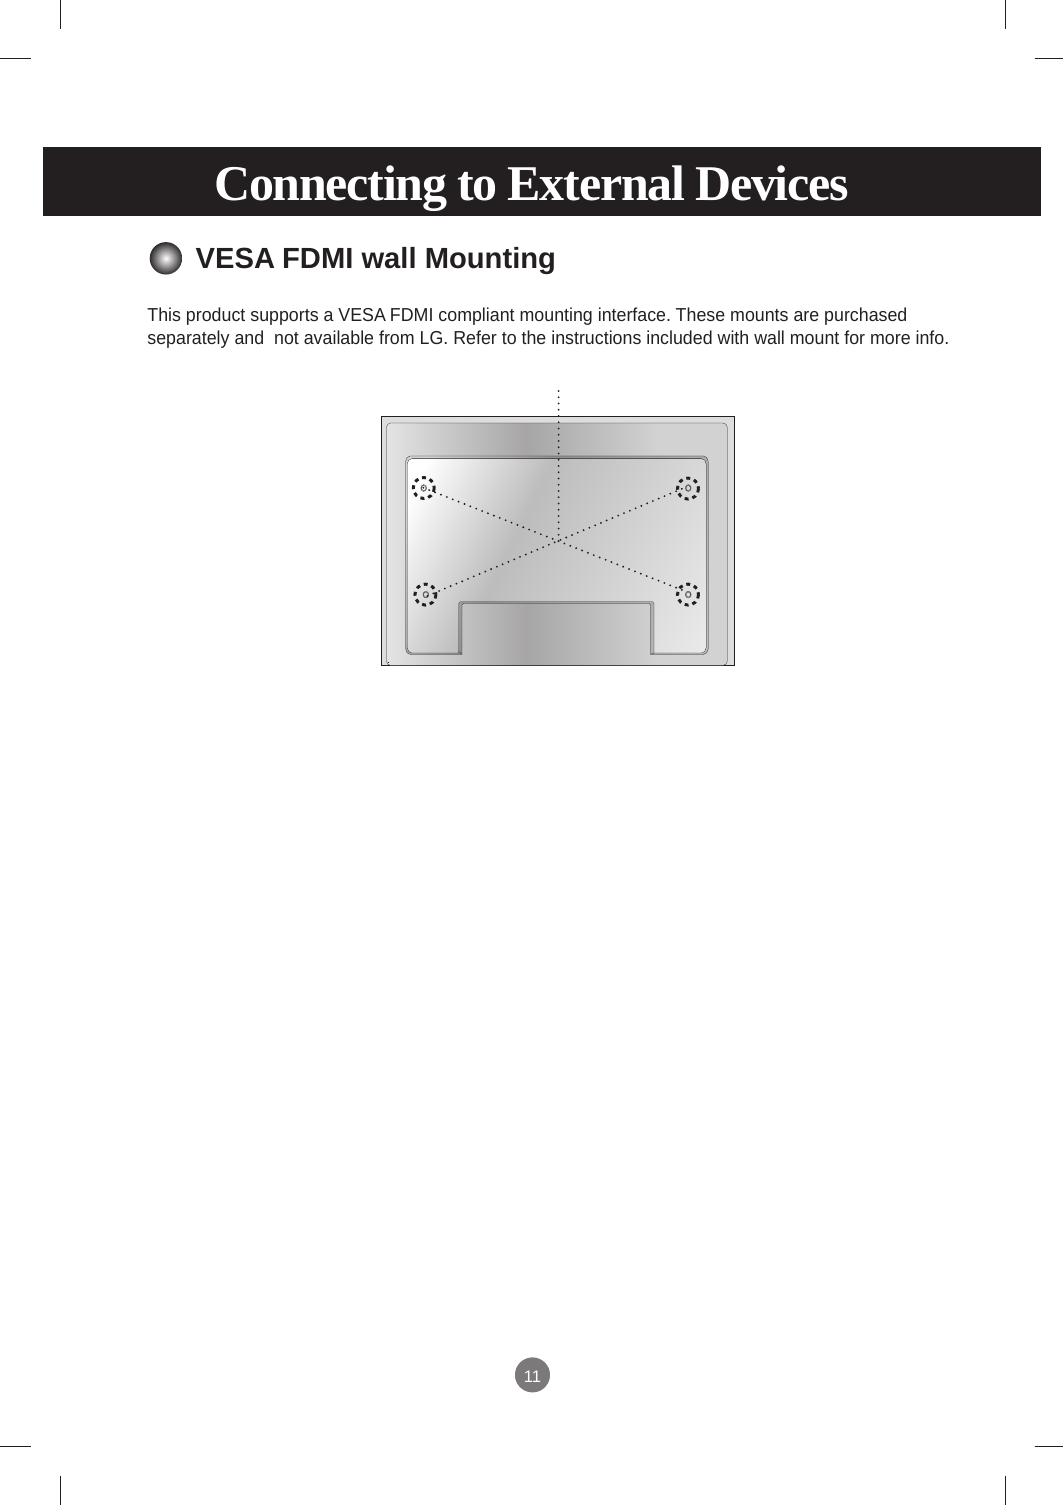 1111Connecting to External DevicesVESA FDMI wall MountingThis product supports a VESA FDMI compliant mounting interface. These mounts are purchased separately and  not available from LG. Refer to the instructions included with wall mount for more info.